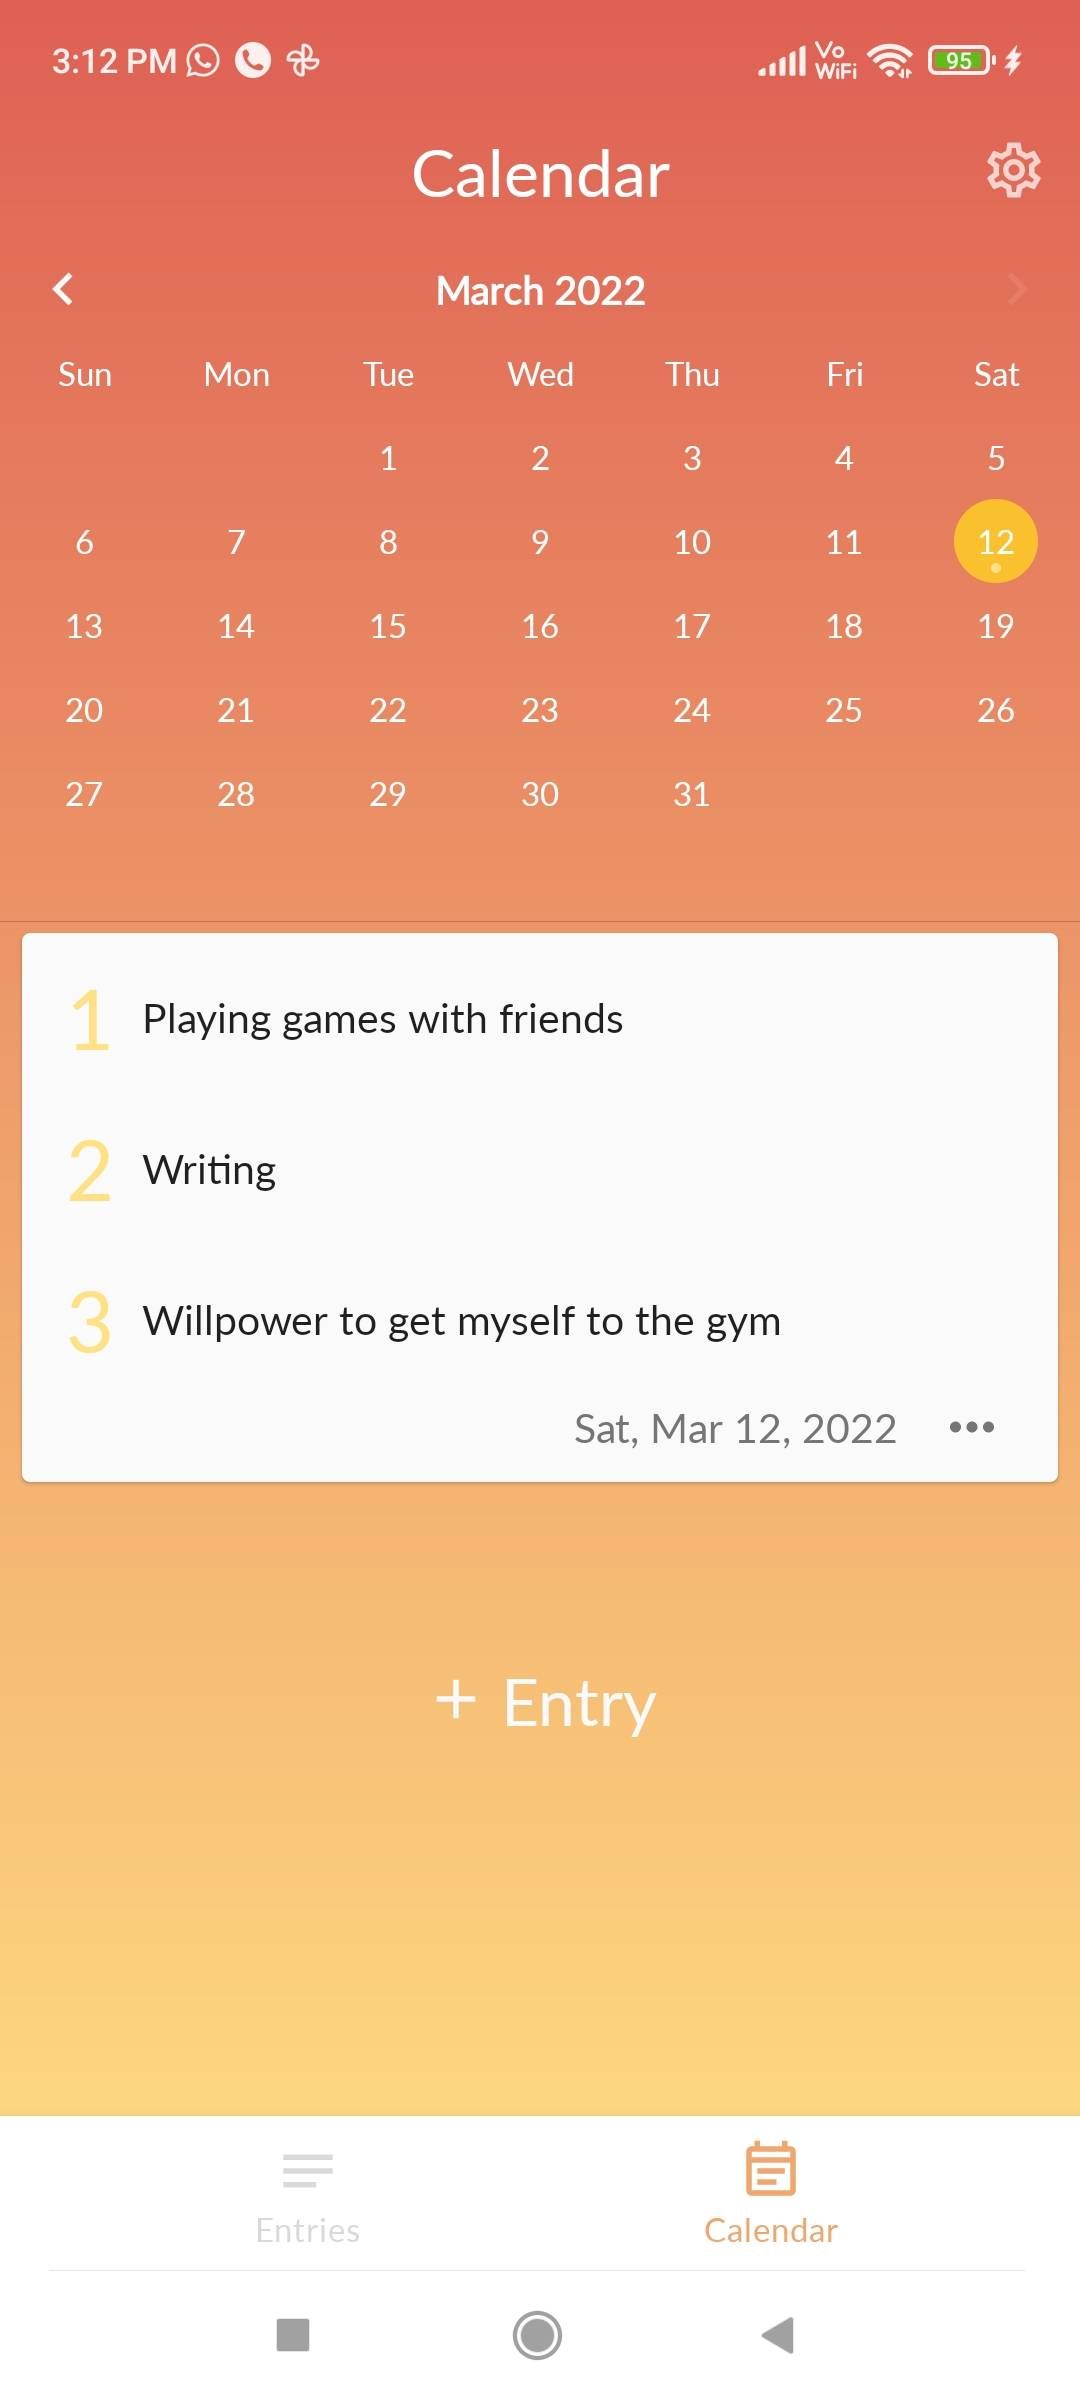 Delightful is a simple gratitude journaling app with a calendar view and wall of posts